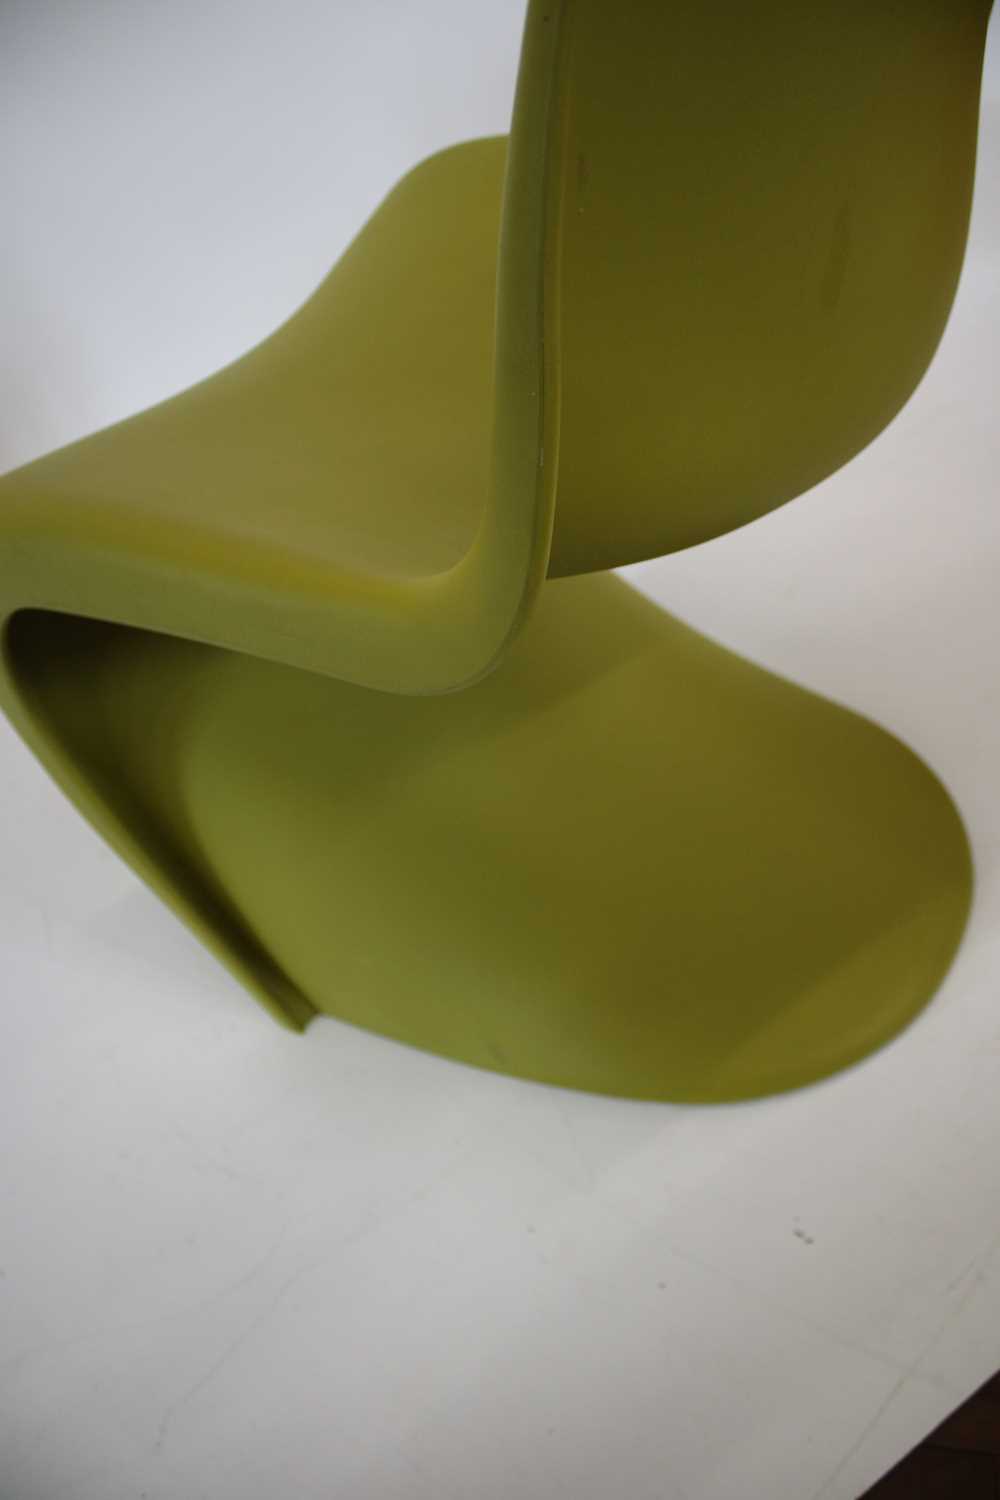 Verner Panton for Vitra Set of Four "Panton" Chairs - Image 9 of 16